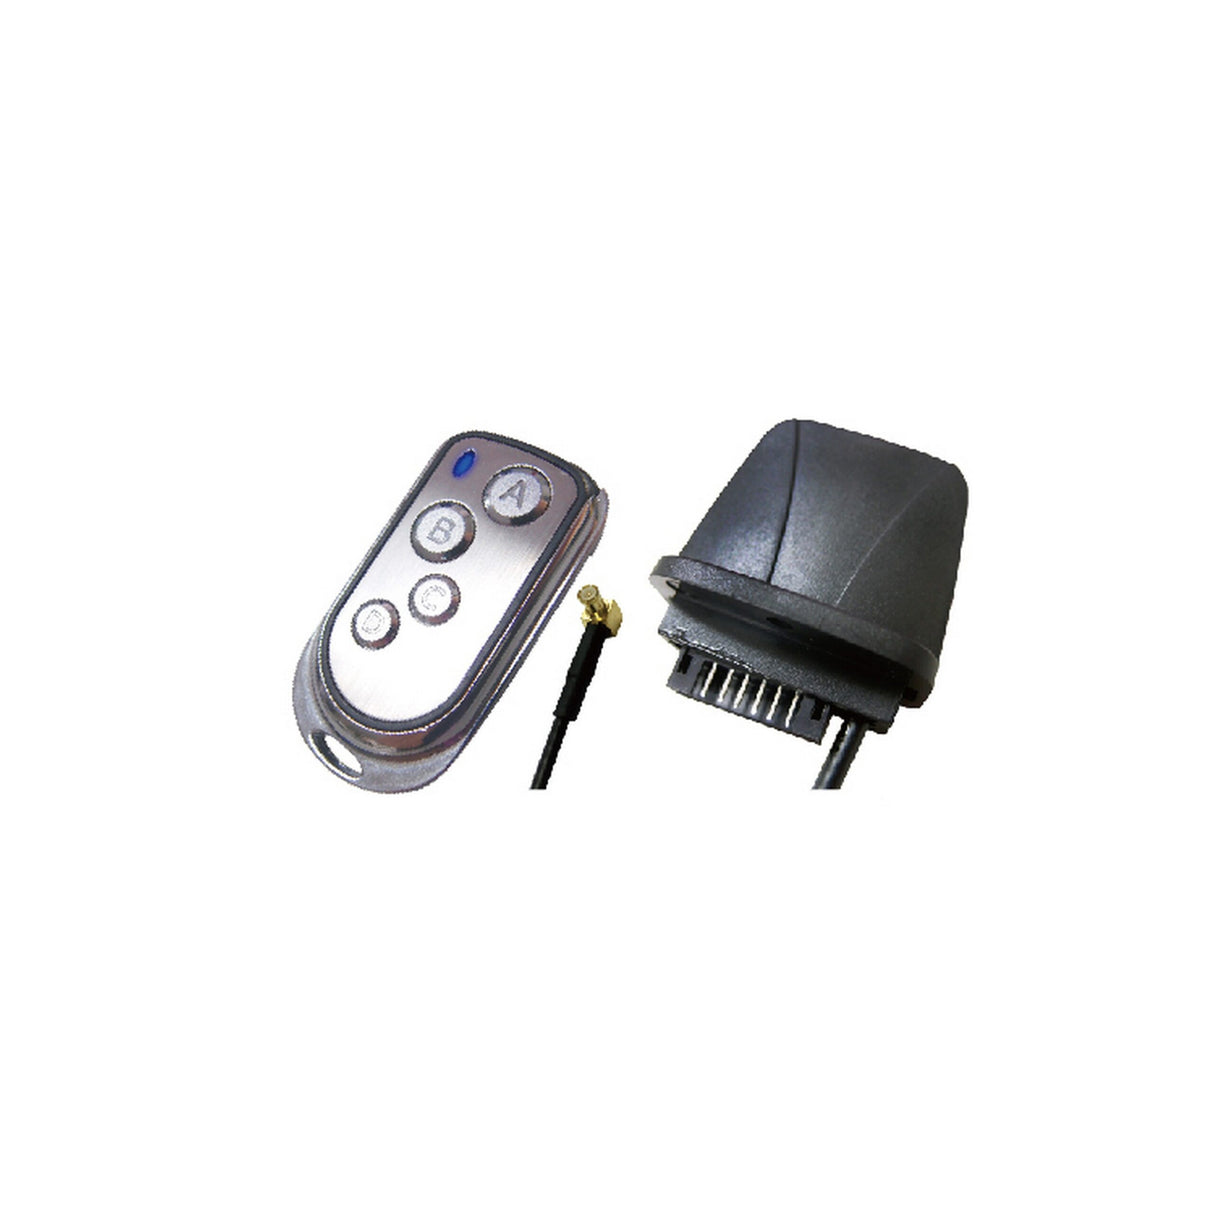 Antari WTR-80 Wireless Remote Kit for S-500 and S-500XL